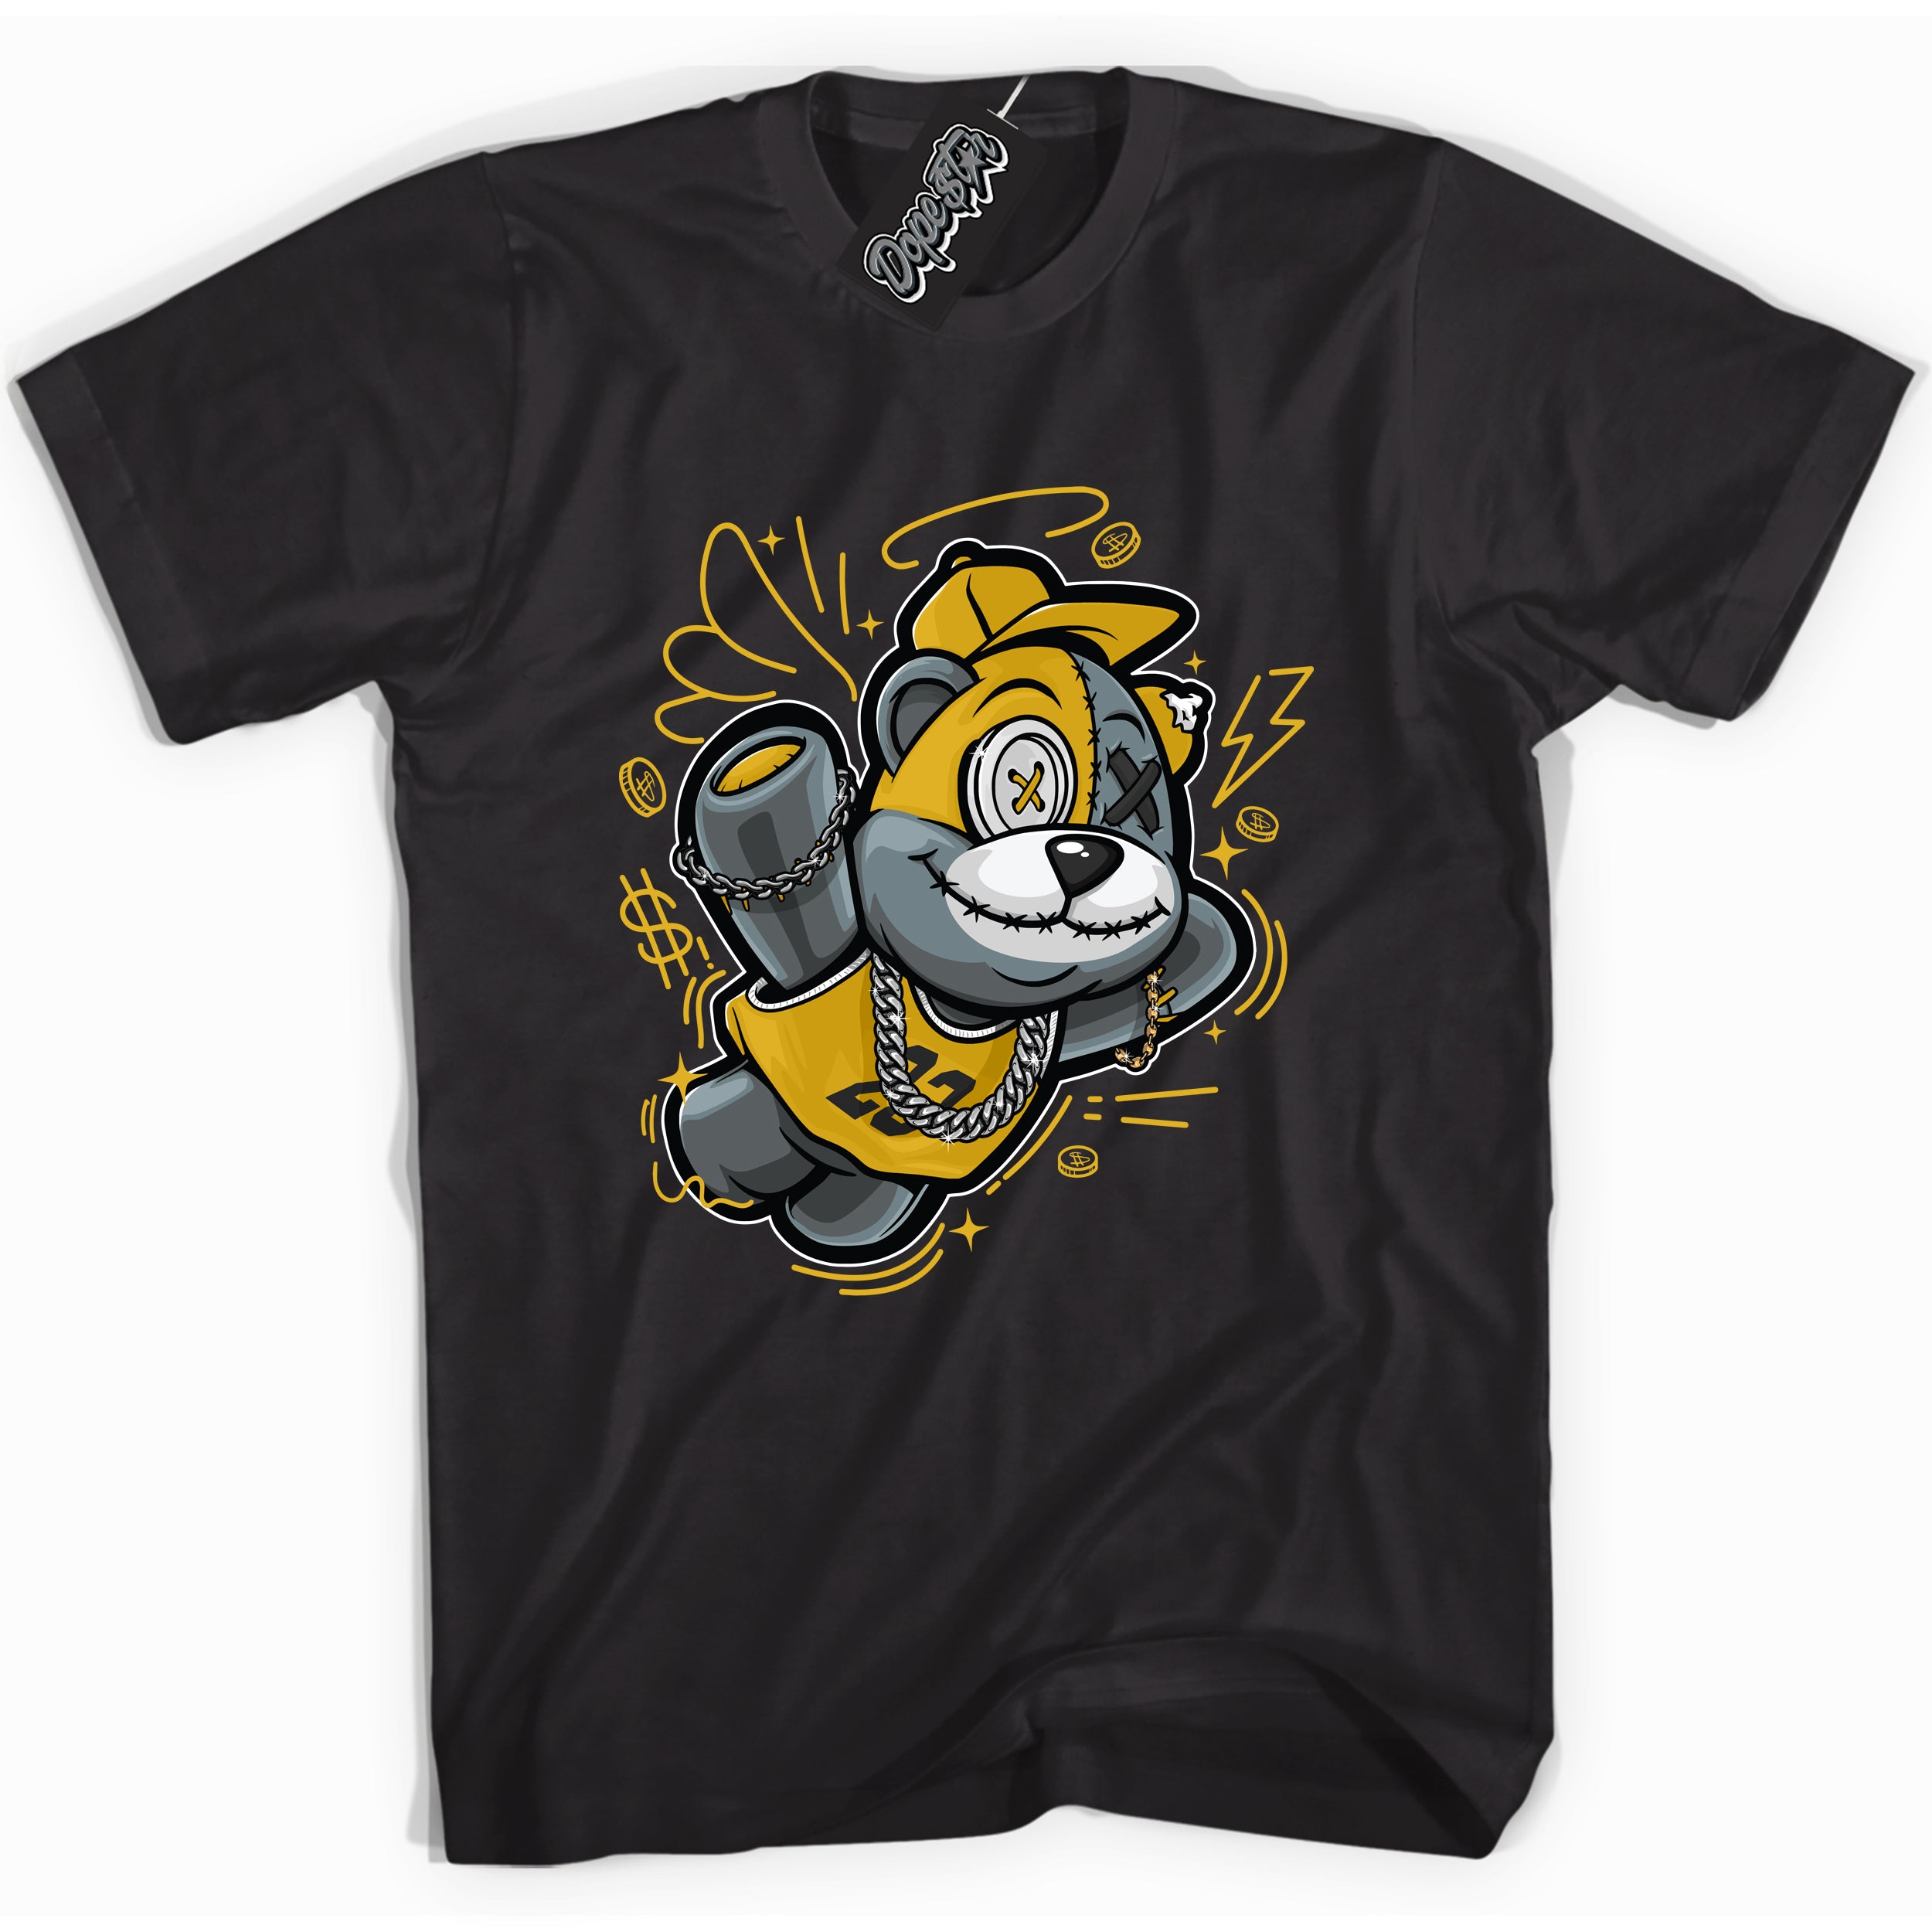 Cool Black Shirt with “ Slam Dunk Bear ” design that perfectly matches Yellow Ochre 6s Sneakers.